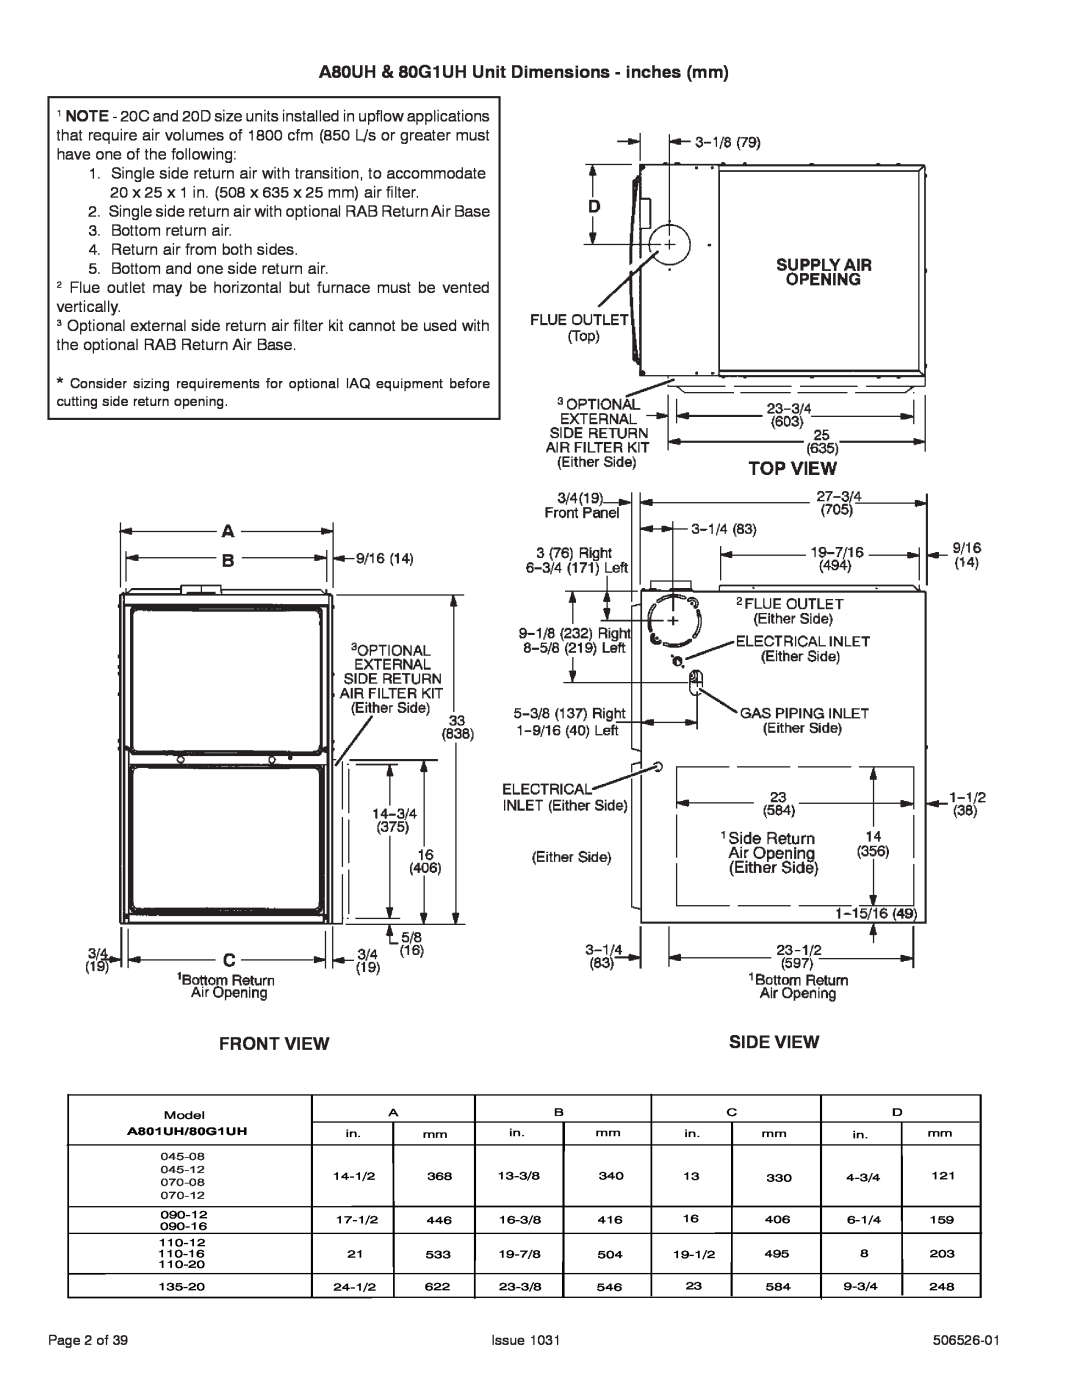 Allied Air Enterprises installation instructions A80UH & 80G1UH Unit Dimensions - inches mm, Front View, Side View 